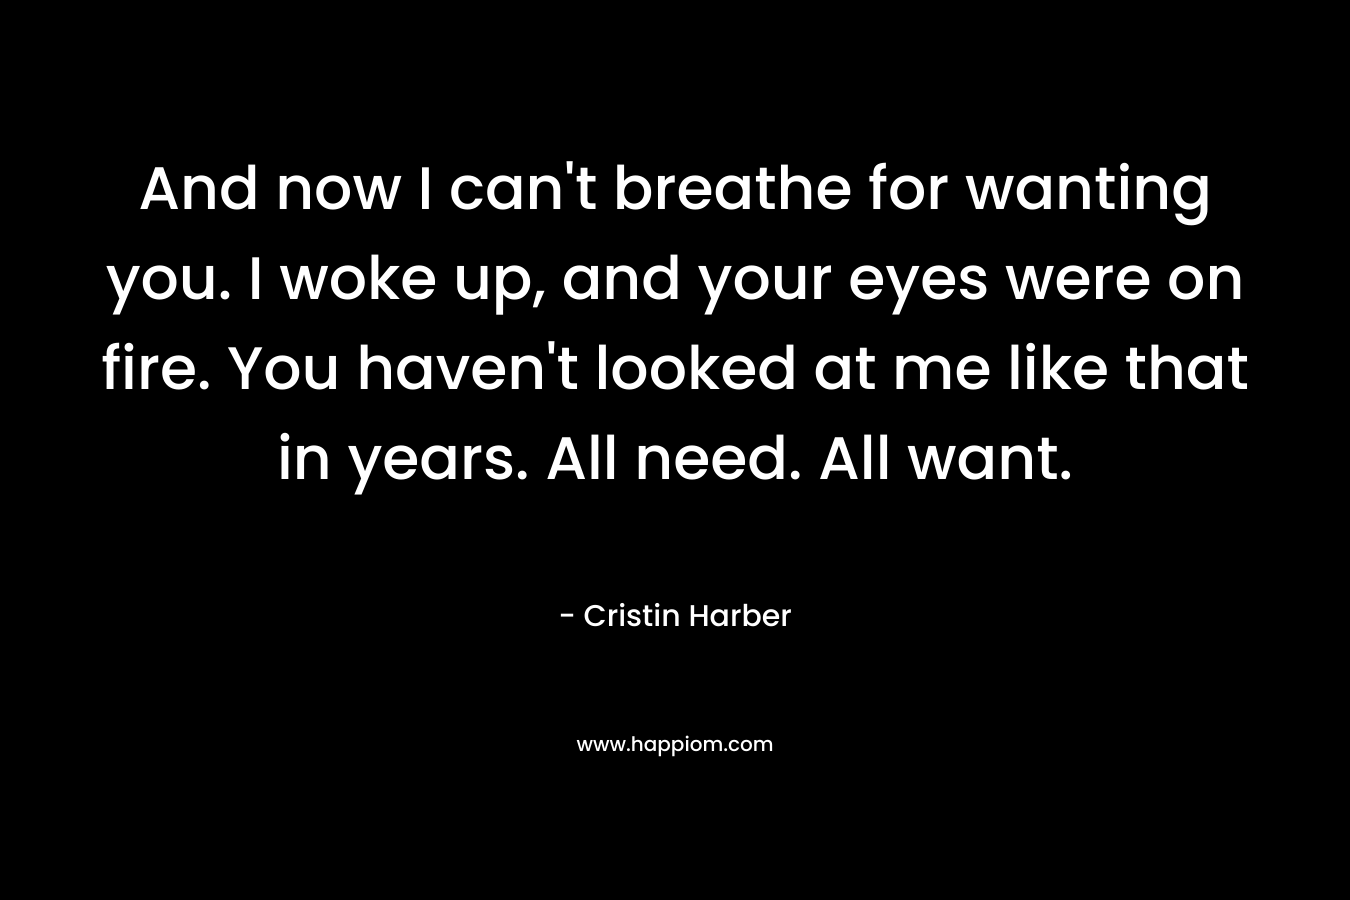 And now I can’t breathe for wanting you. I woke up, and your eyes were on fire. You haven’t looked at me like that in years. All need. All want. – Cristin Harber